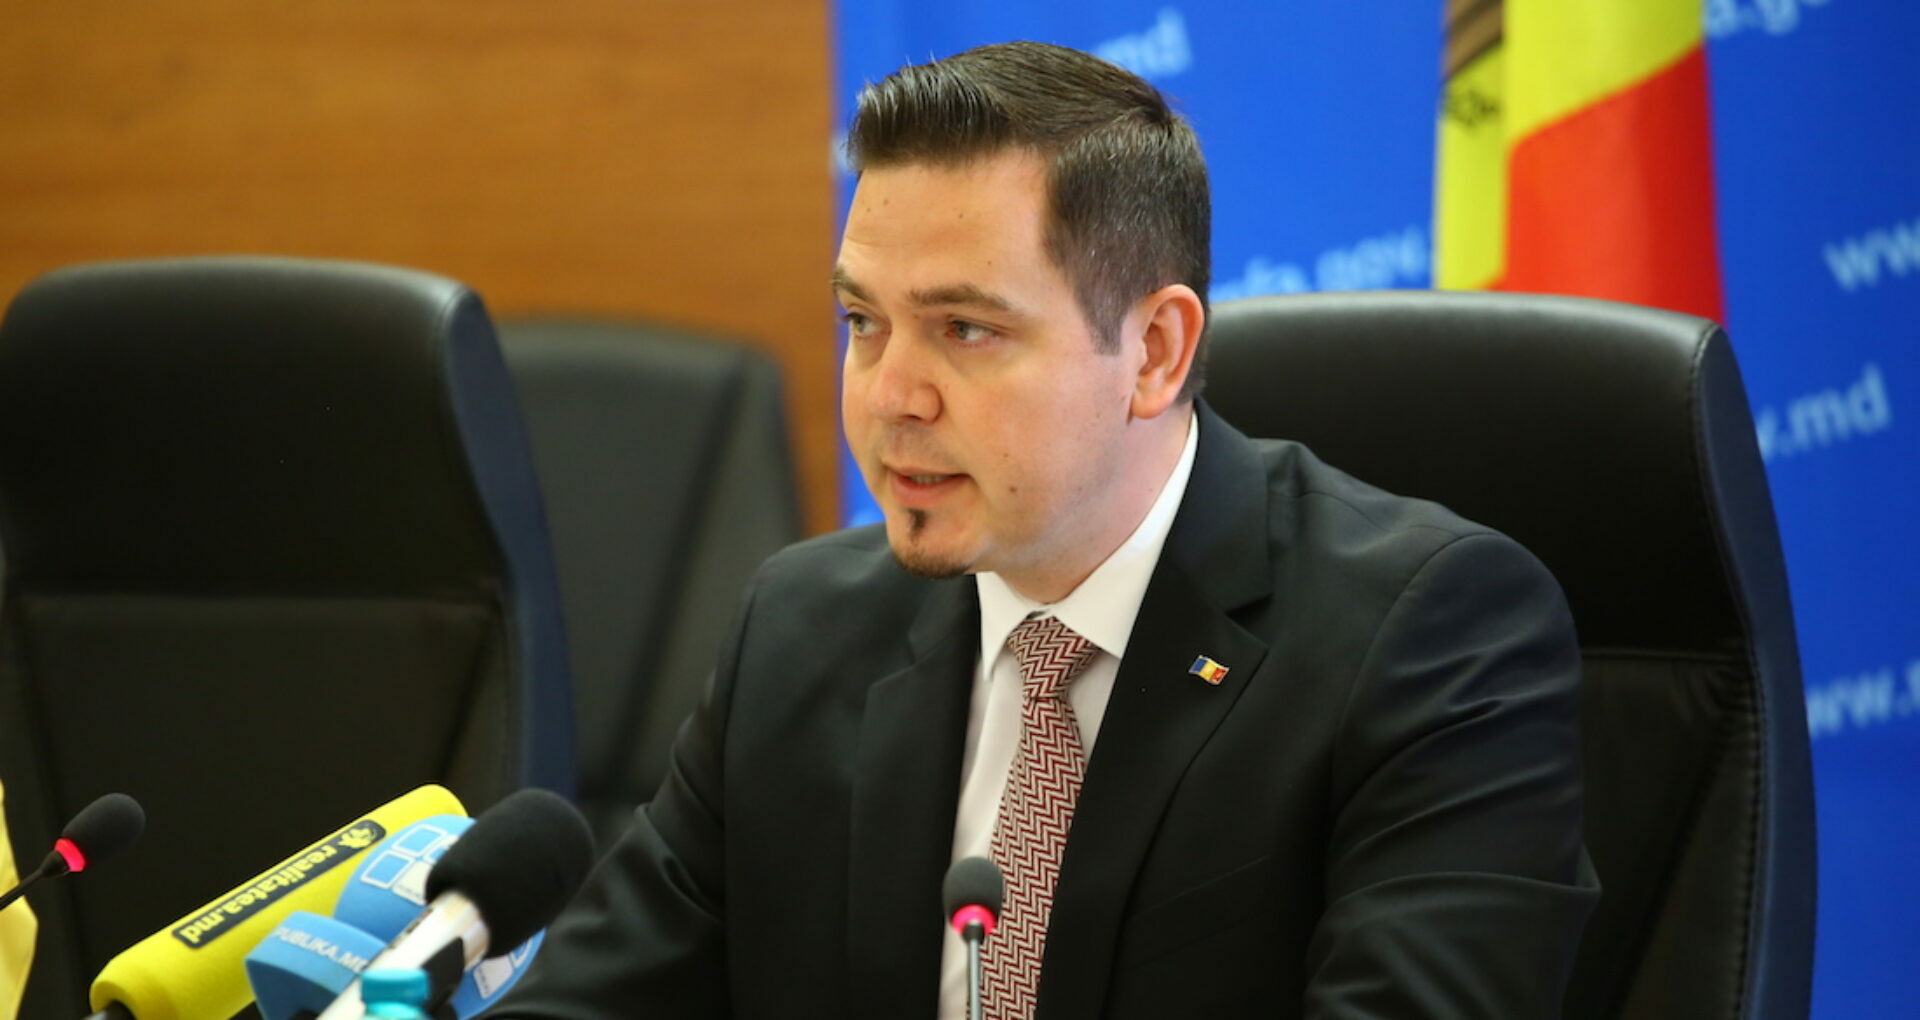 Former Moldovan Minister of Foreign Affairs Accuses Pressure From the Government to Withdraw From the WTO Leadership Race